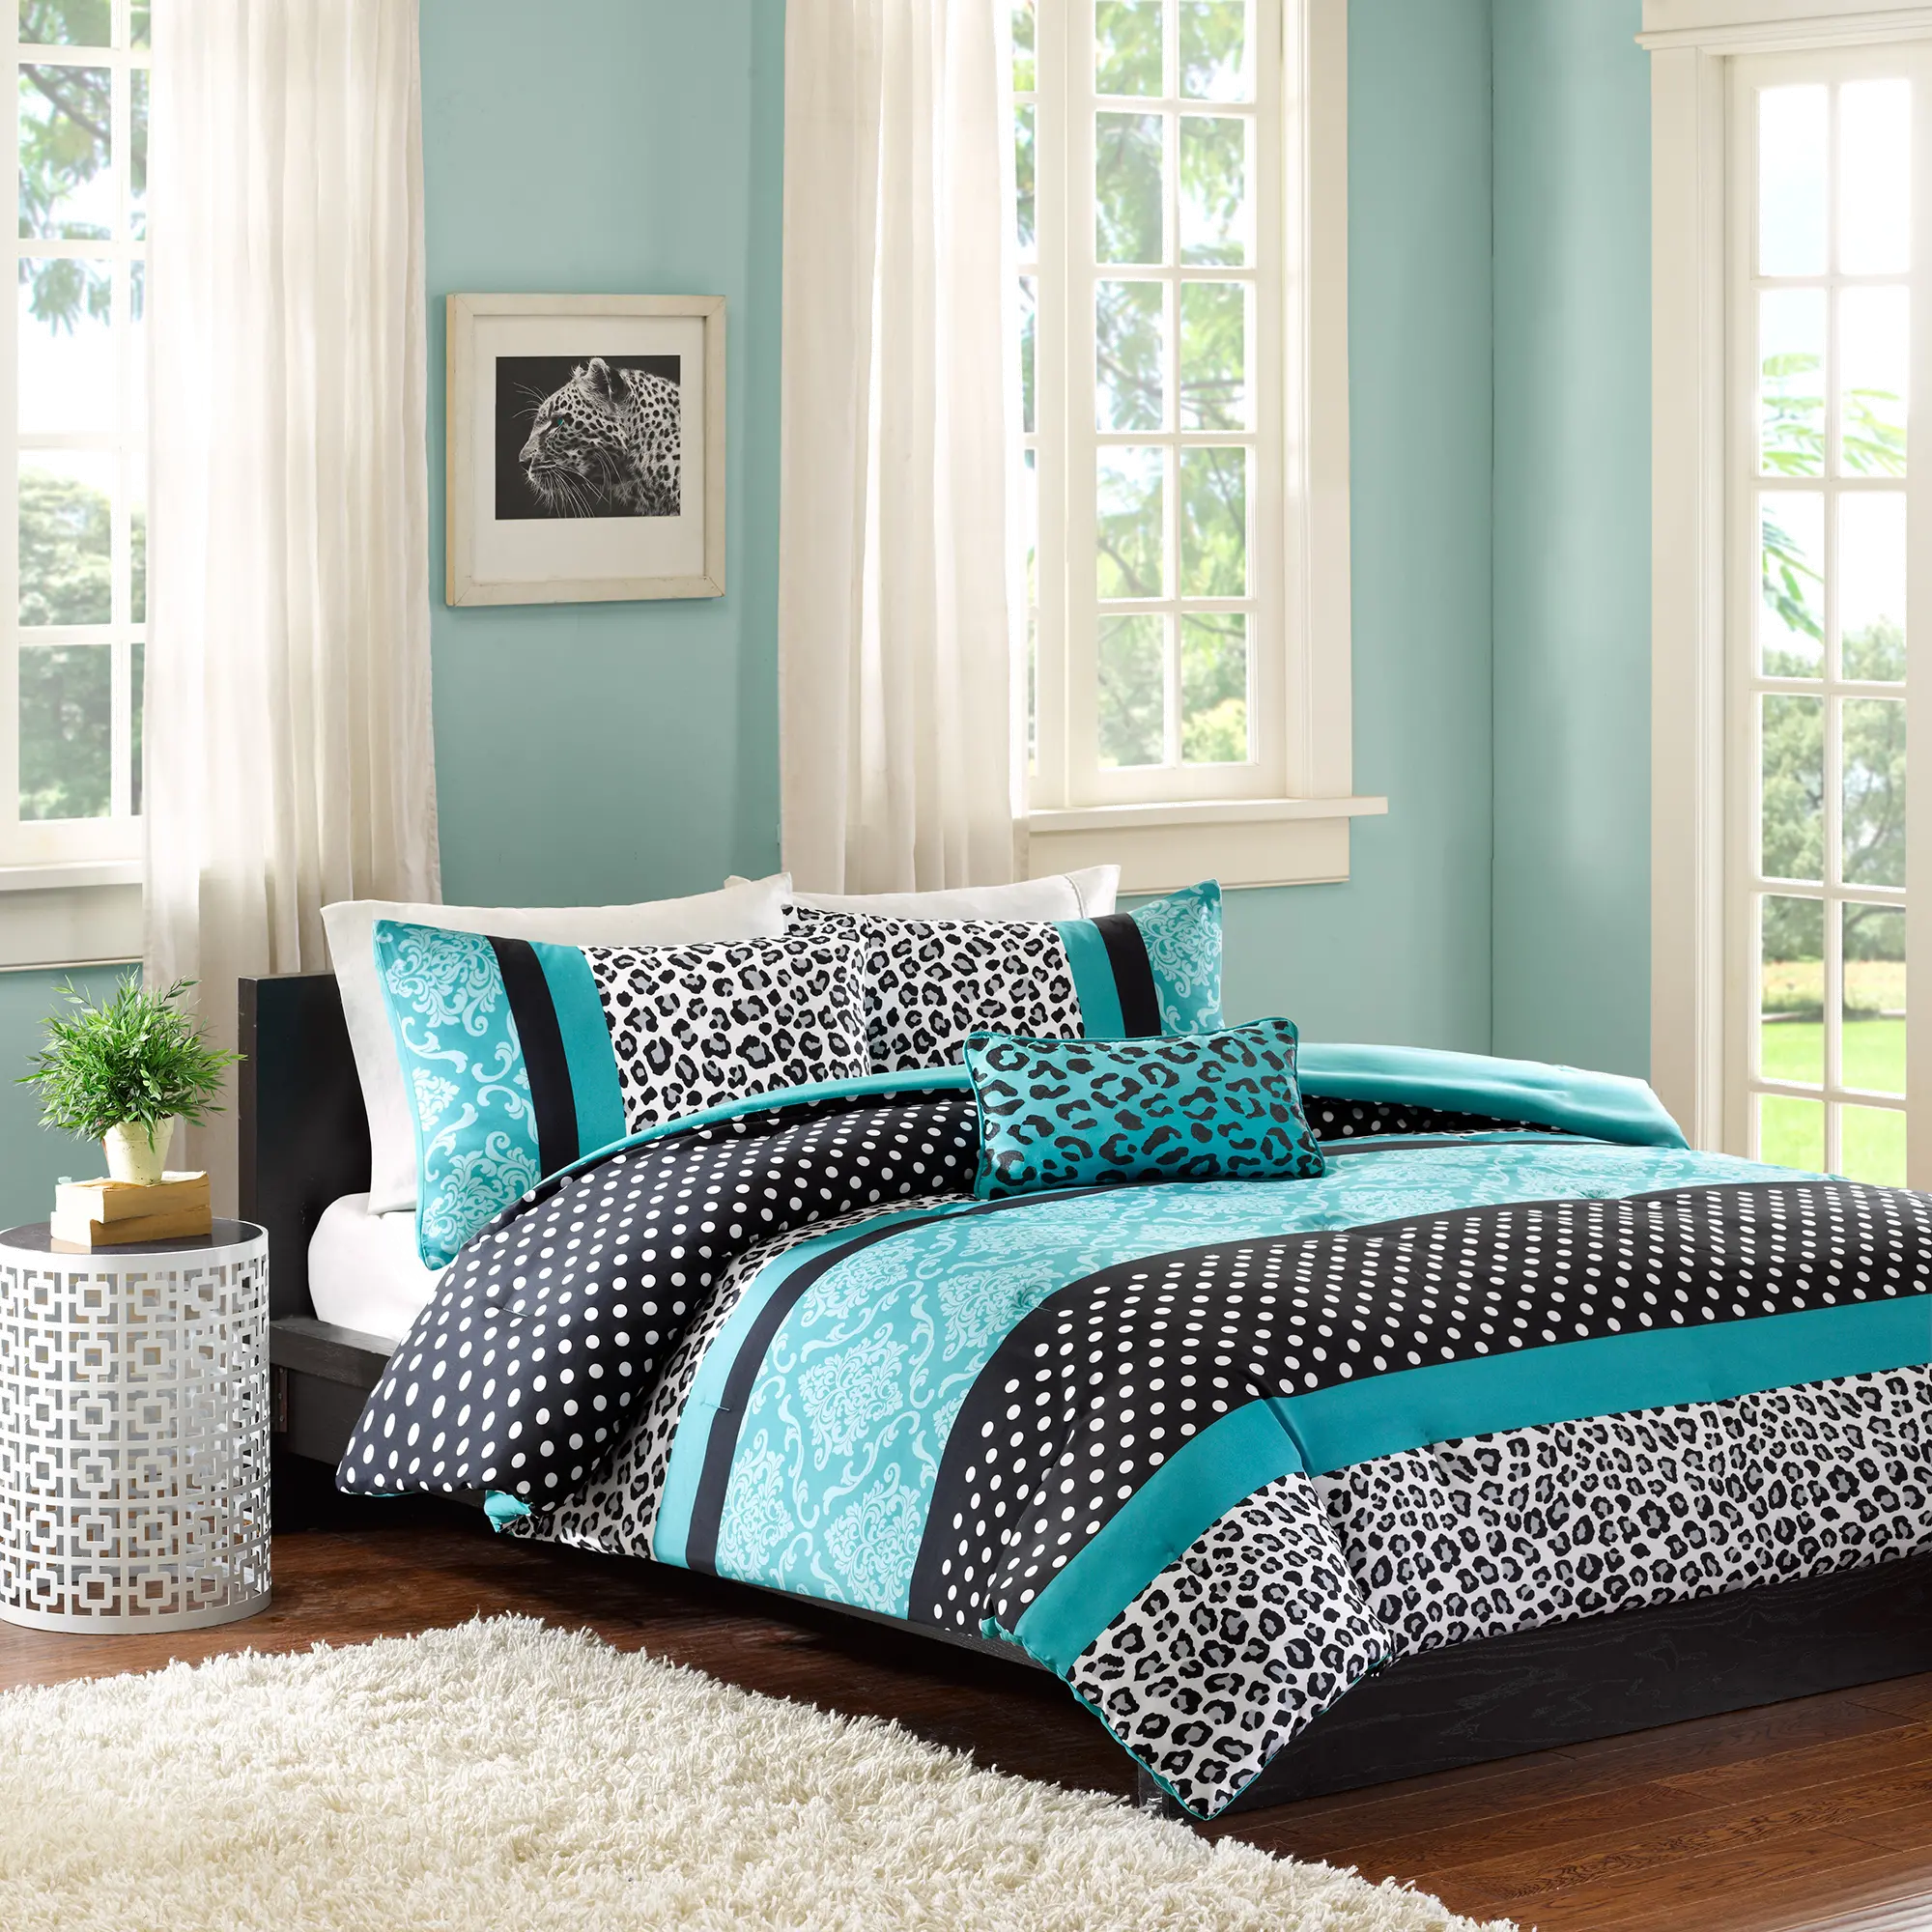 Chloe Teal Full-Queen 4 Piece Bedding Collection